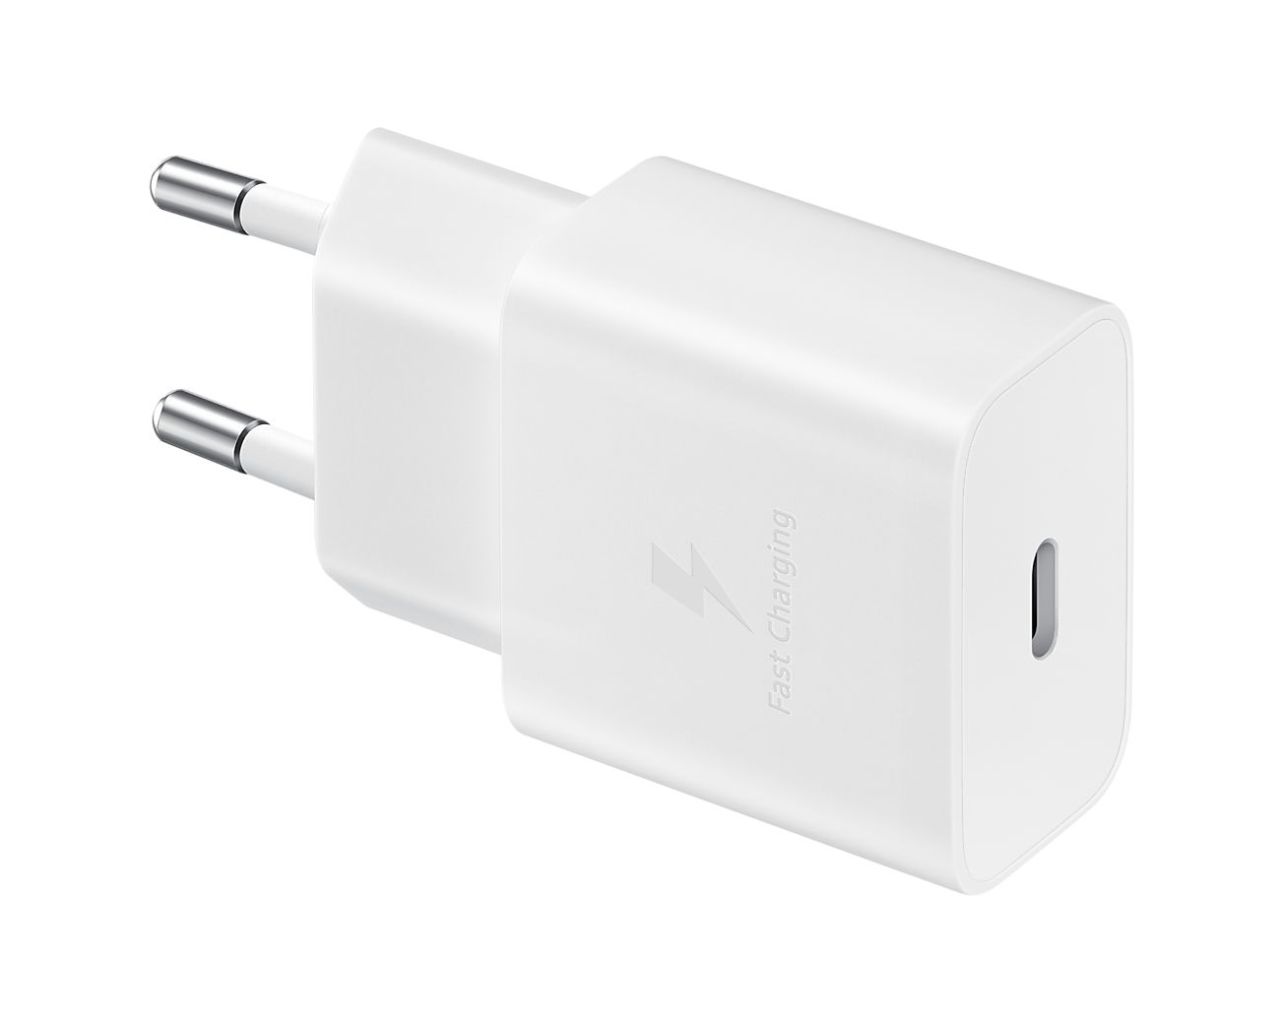 Samsung 15W PD Power Adapter White